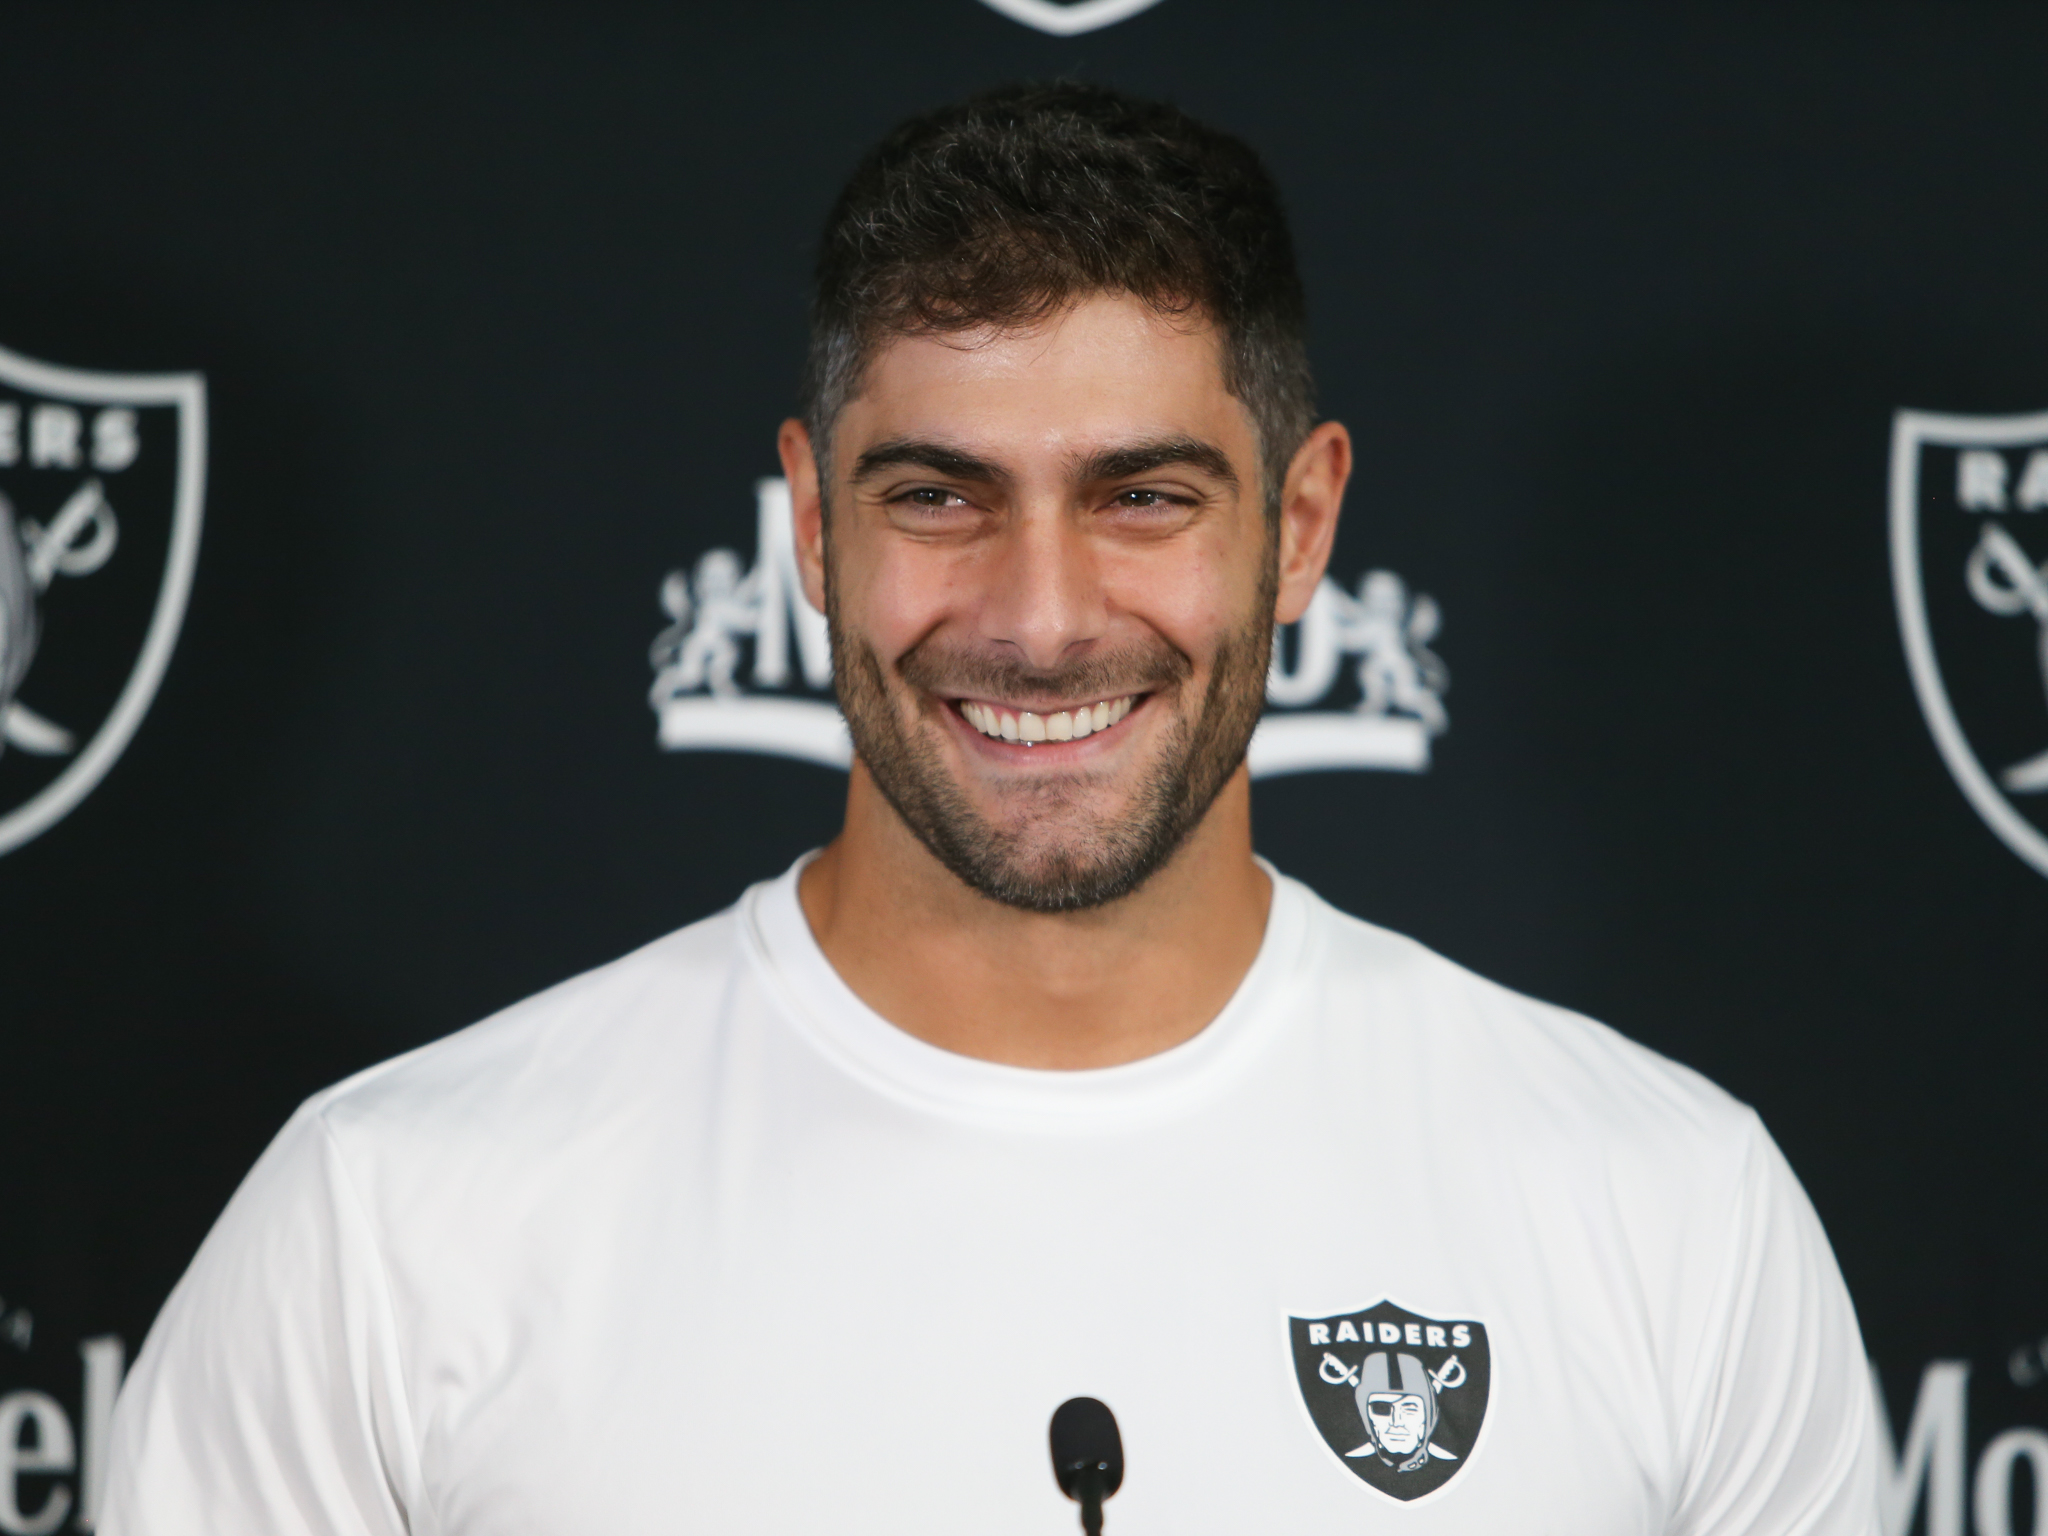 Jimmy Garoppolo is a better quarterback than what people saw with the Las Vegas Raiders.